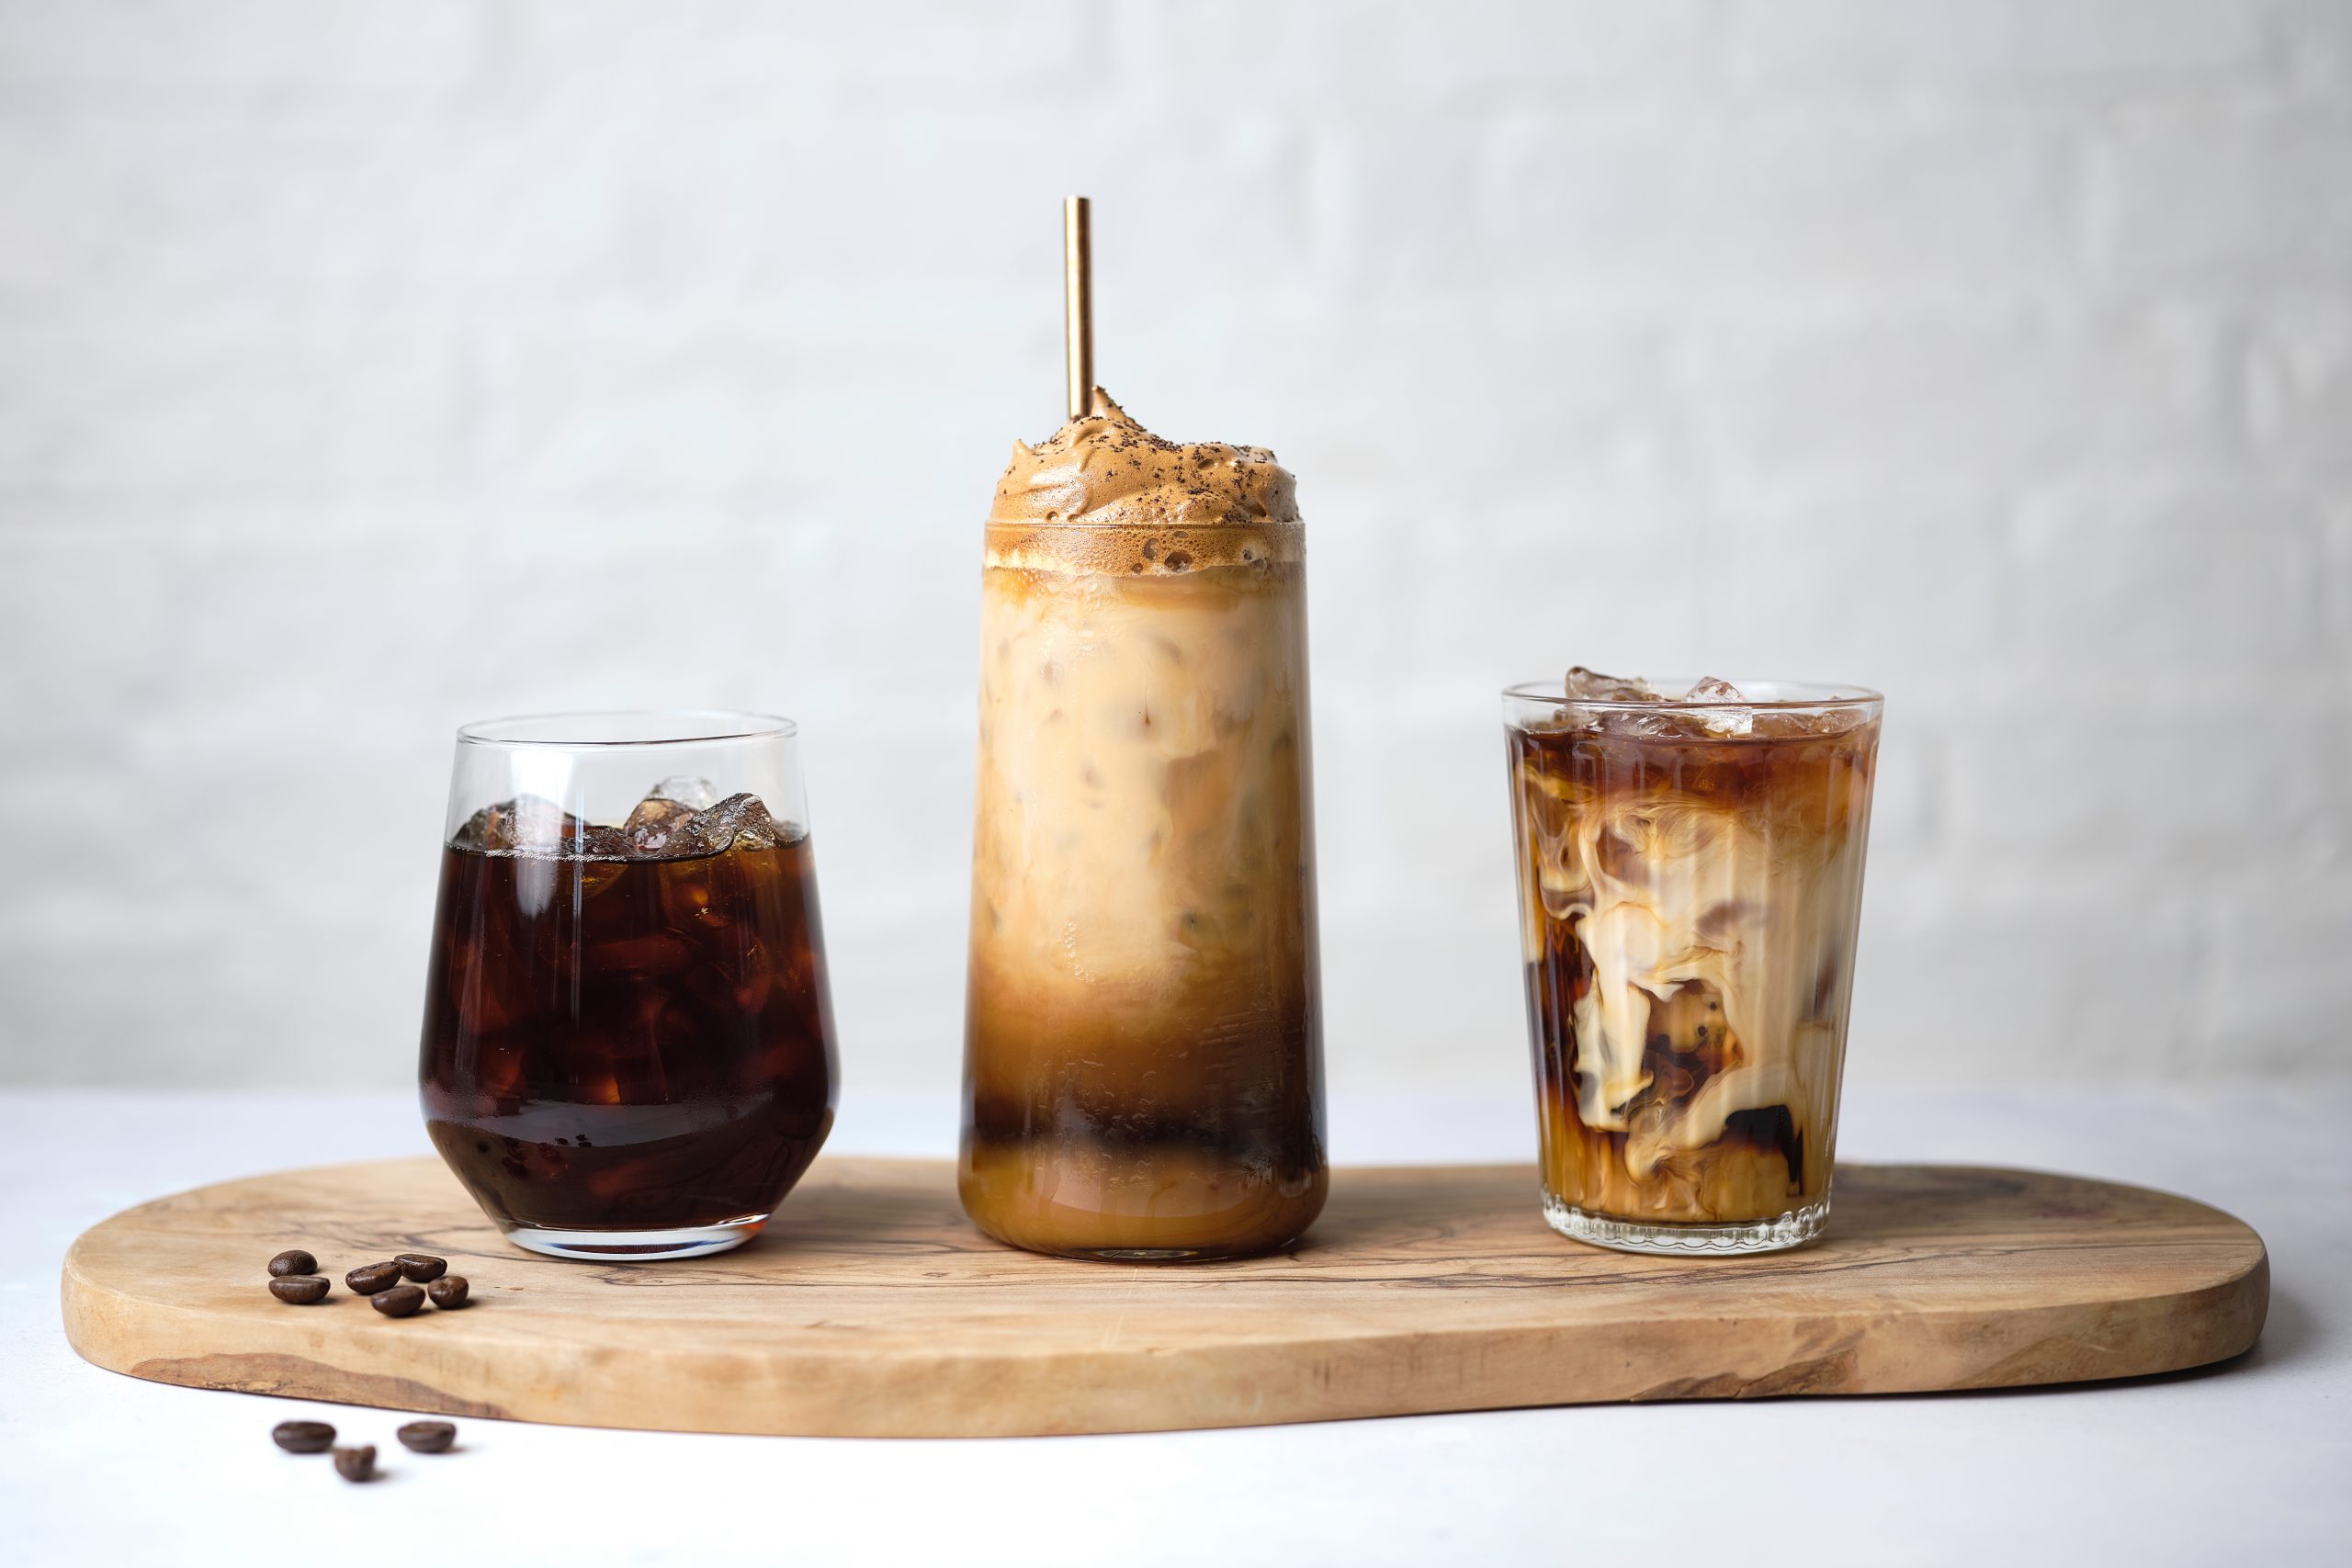 Finlays’ new UK cold-brew extraction plant is great opportunity for major brands